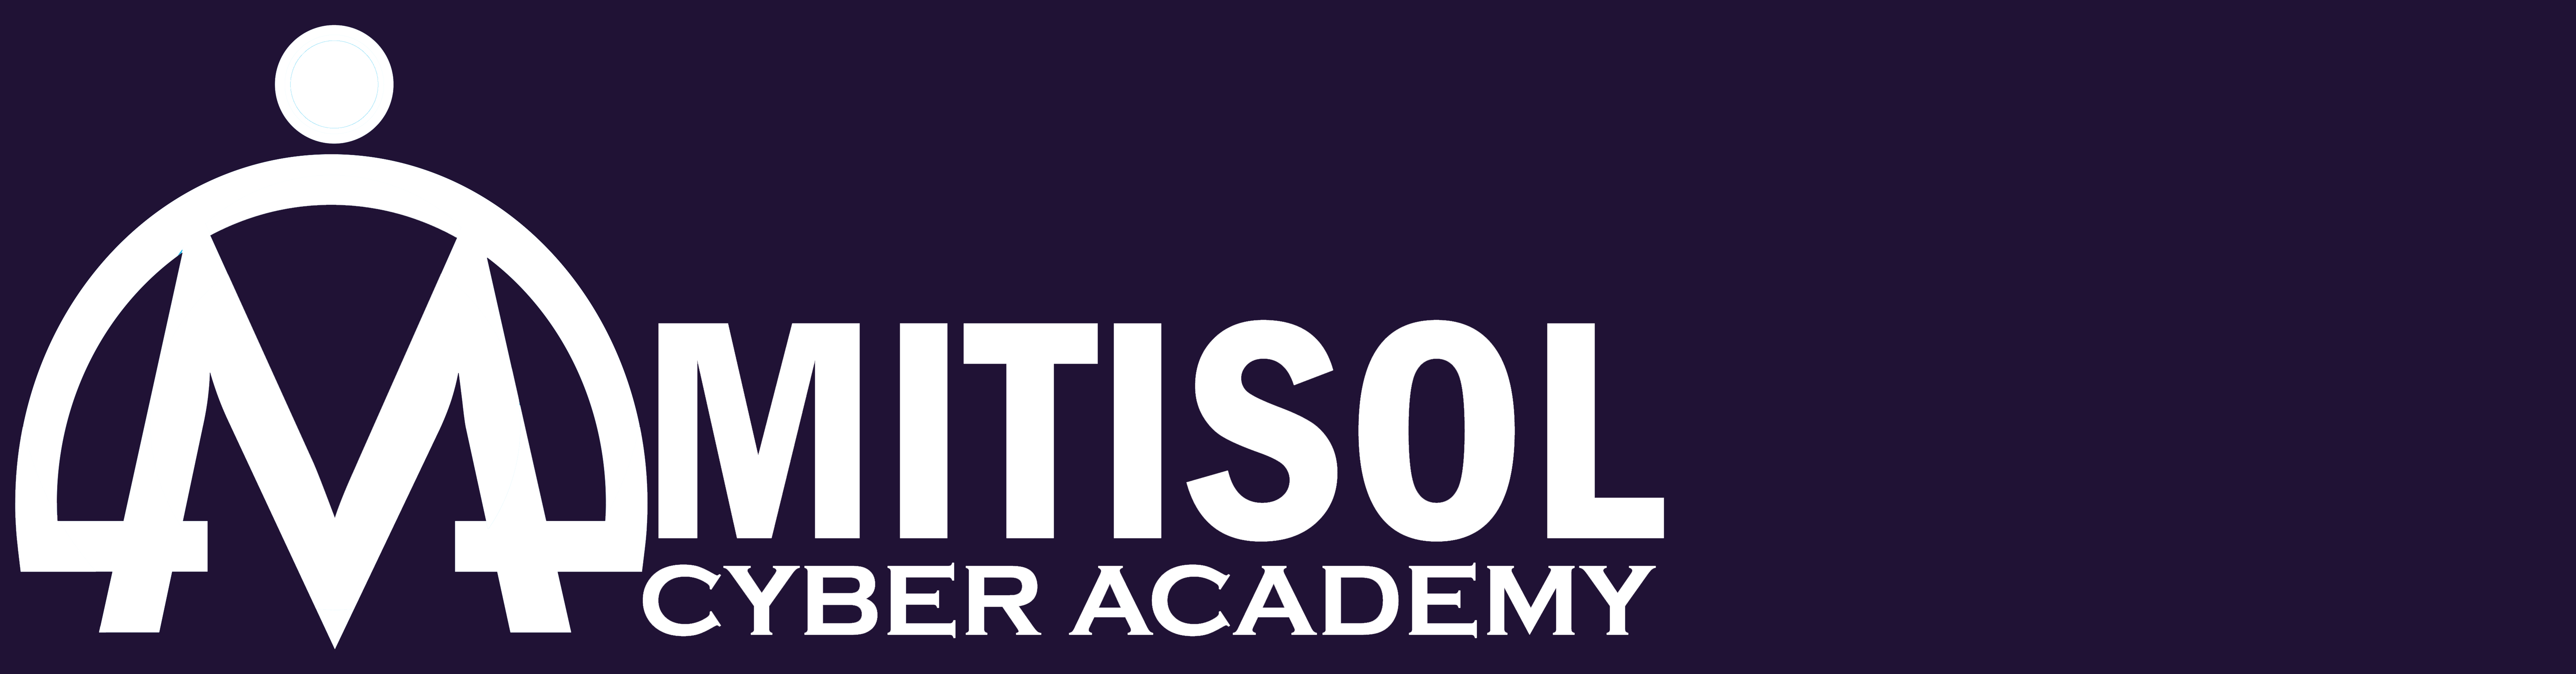 Mitisol Cyber Academy - A Leading Advanced Level Cyber Security Training Provider